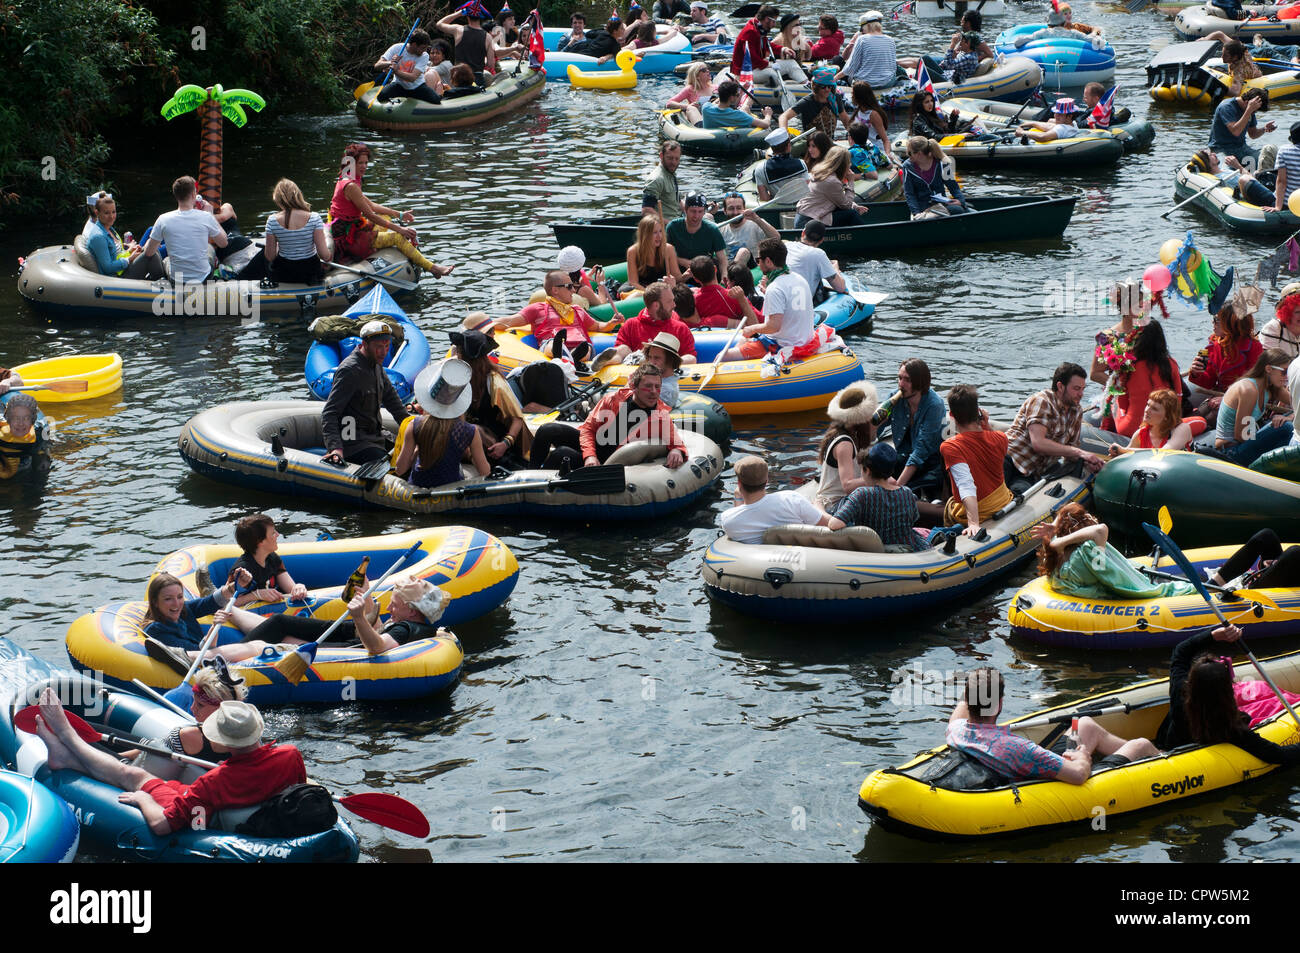 Queen's Jubillegal flotilla floating party, Regent's Canal, East London. Partygoers in inflatable dinghies float down the canal. Stock Photo